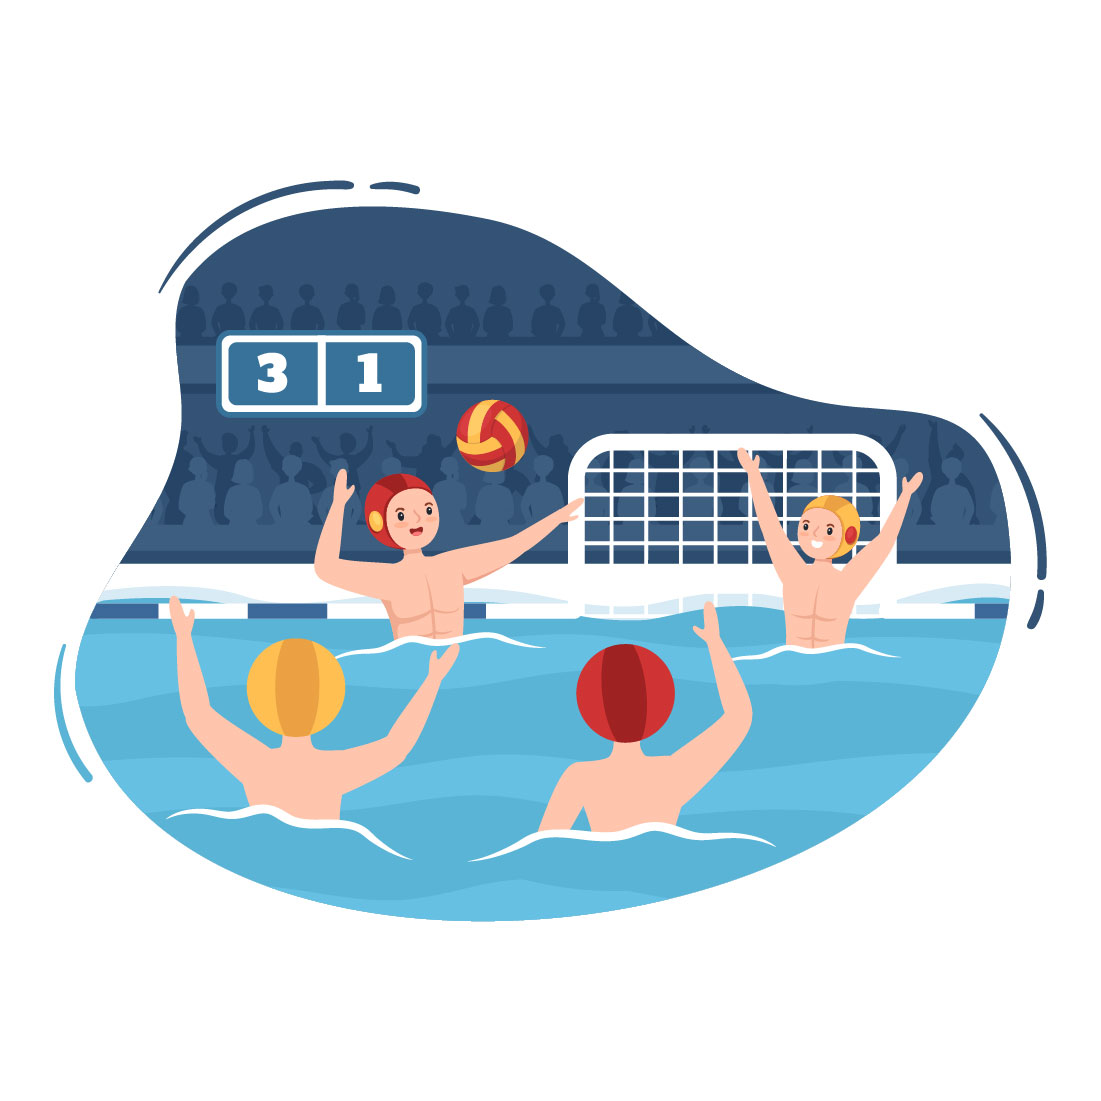 Water Polo Sport Player Illustration cover image.